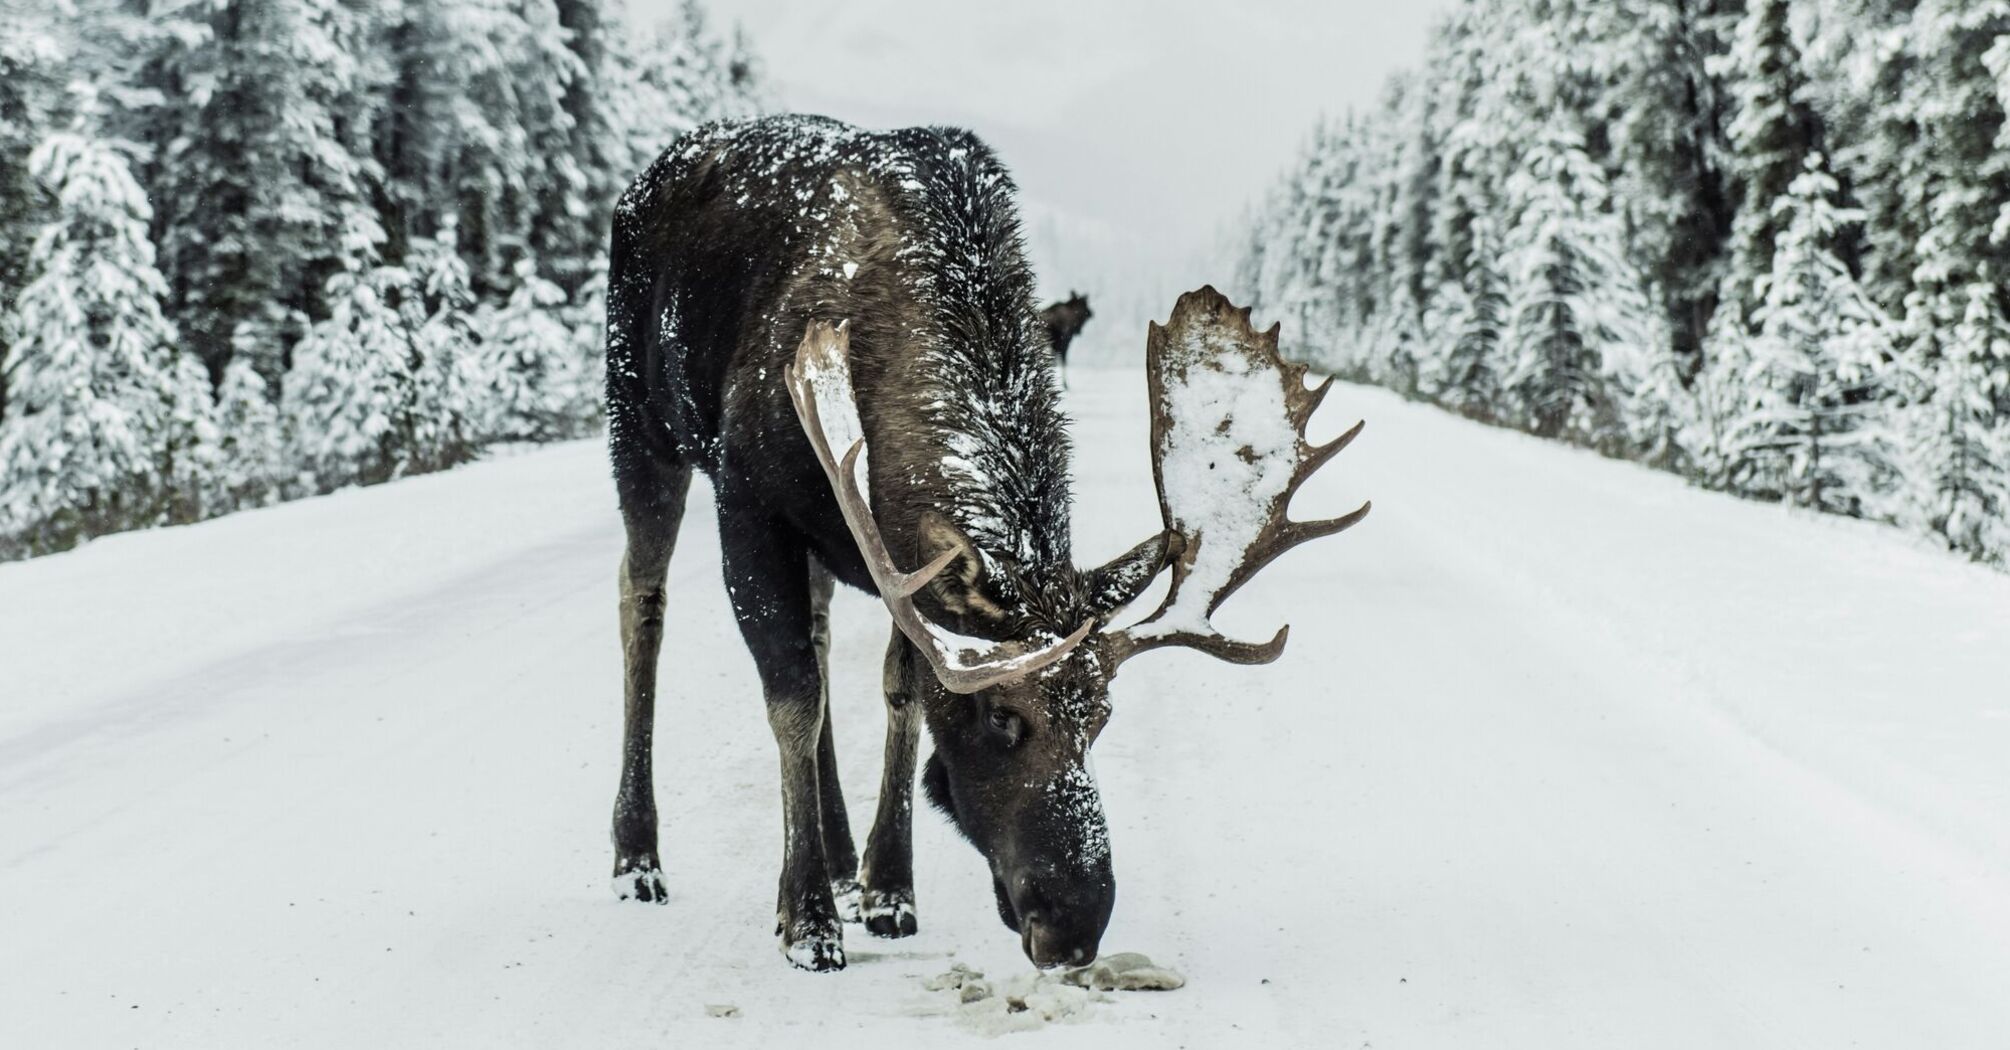 A moose came on the winter road